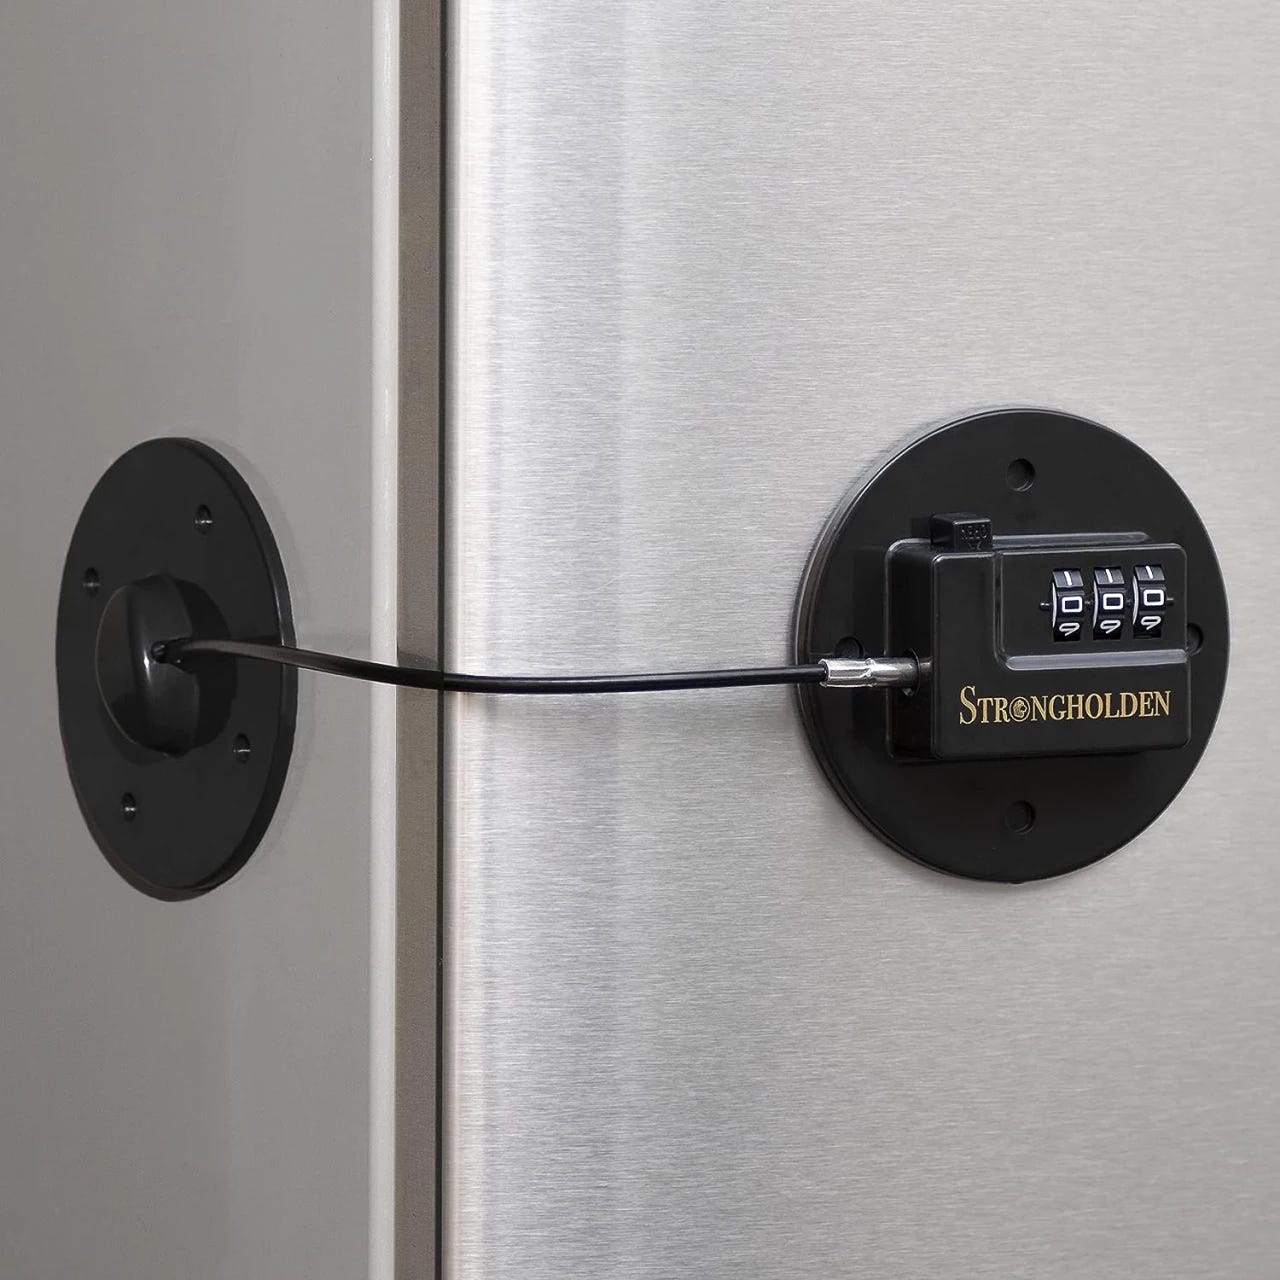 Thoughts on Refrigerator locks? : r/preppers